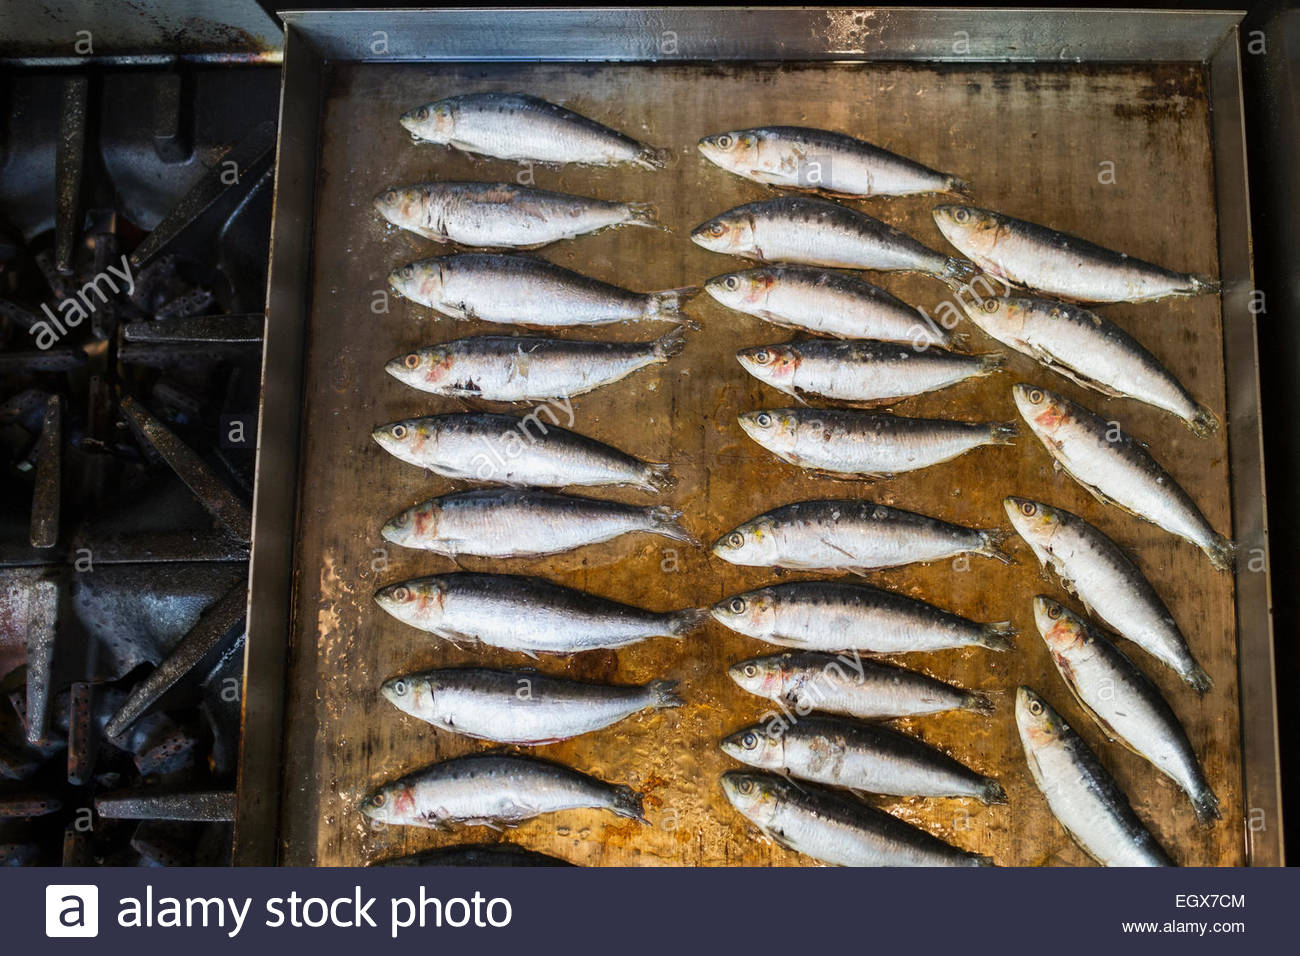 Small fish cooking on flat top stove Stock Photo